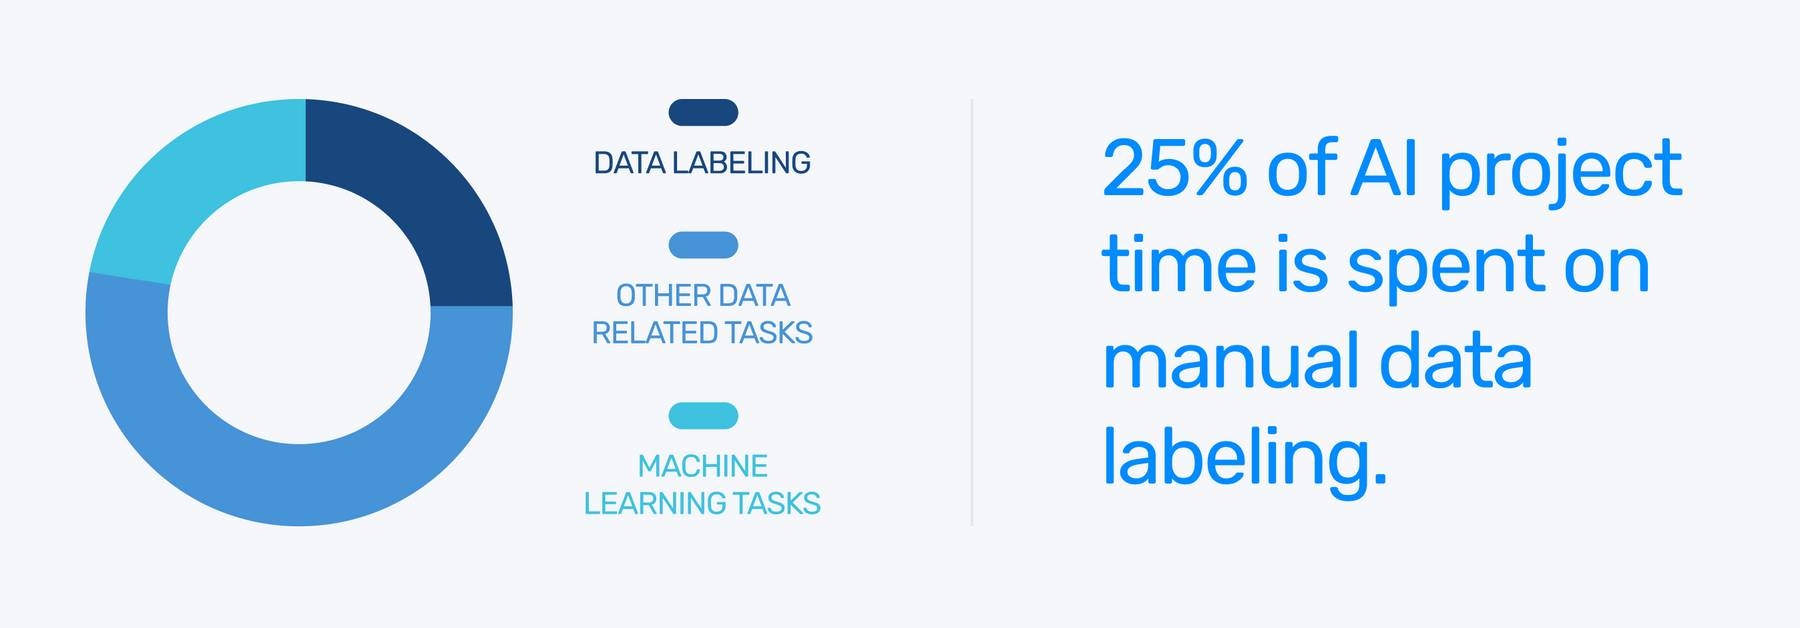 A graph showing how much time is spent on AI tasks: Data labeling (25%), other data related tasks (55%), machine learning tasks (20%)